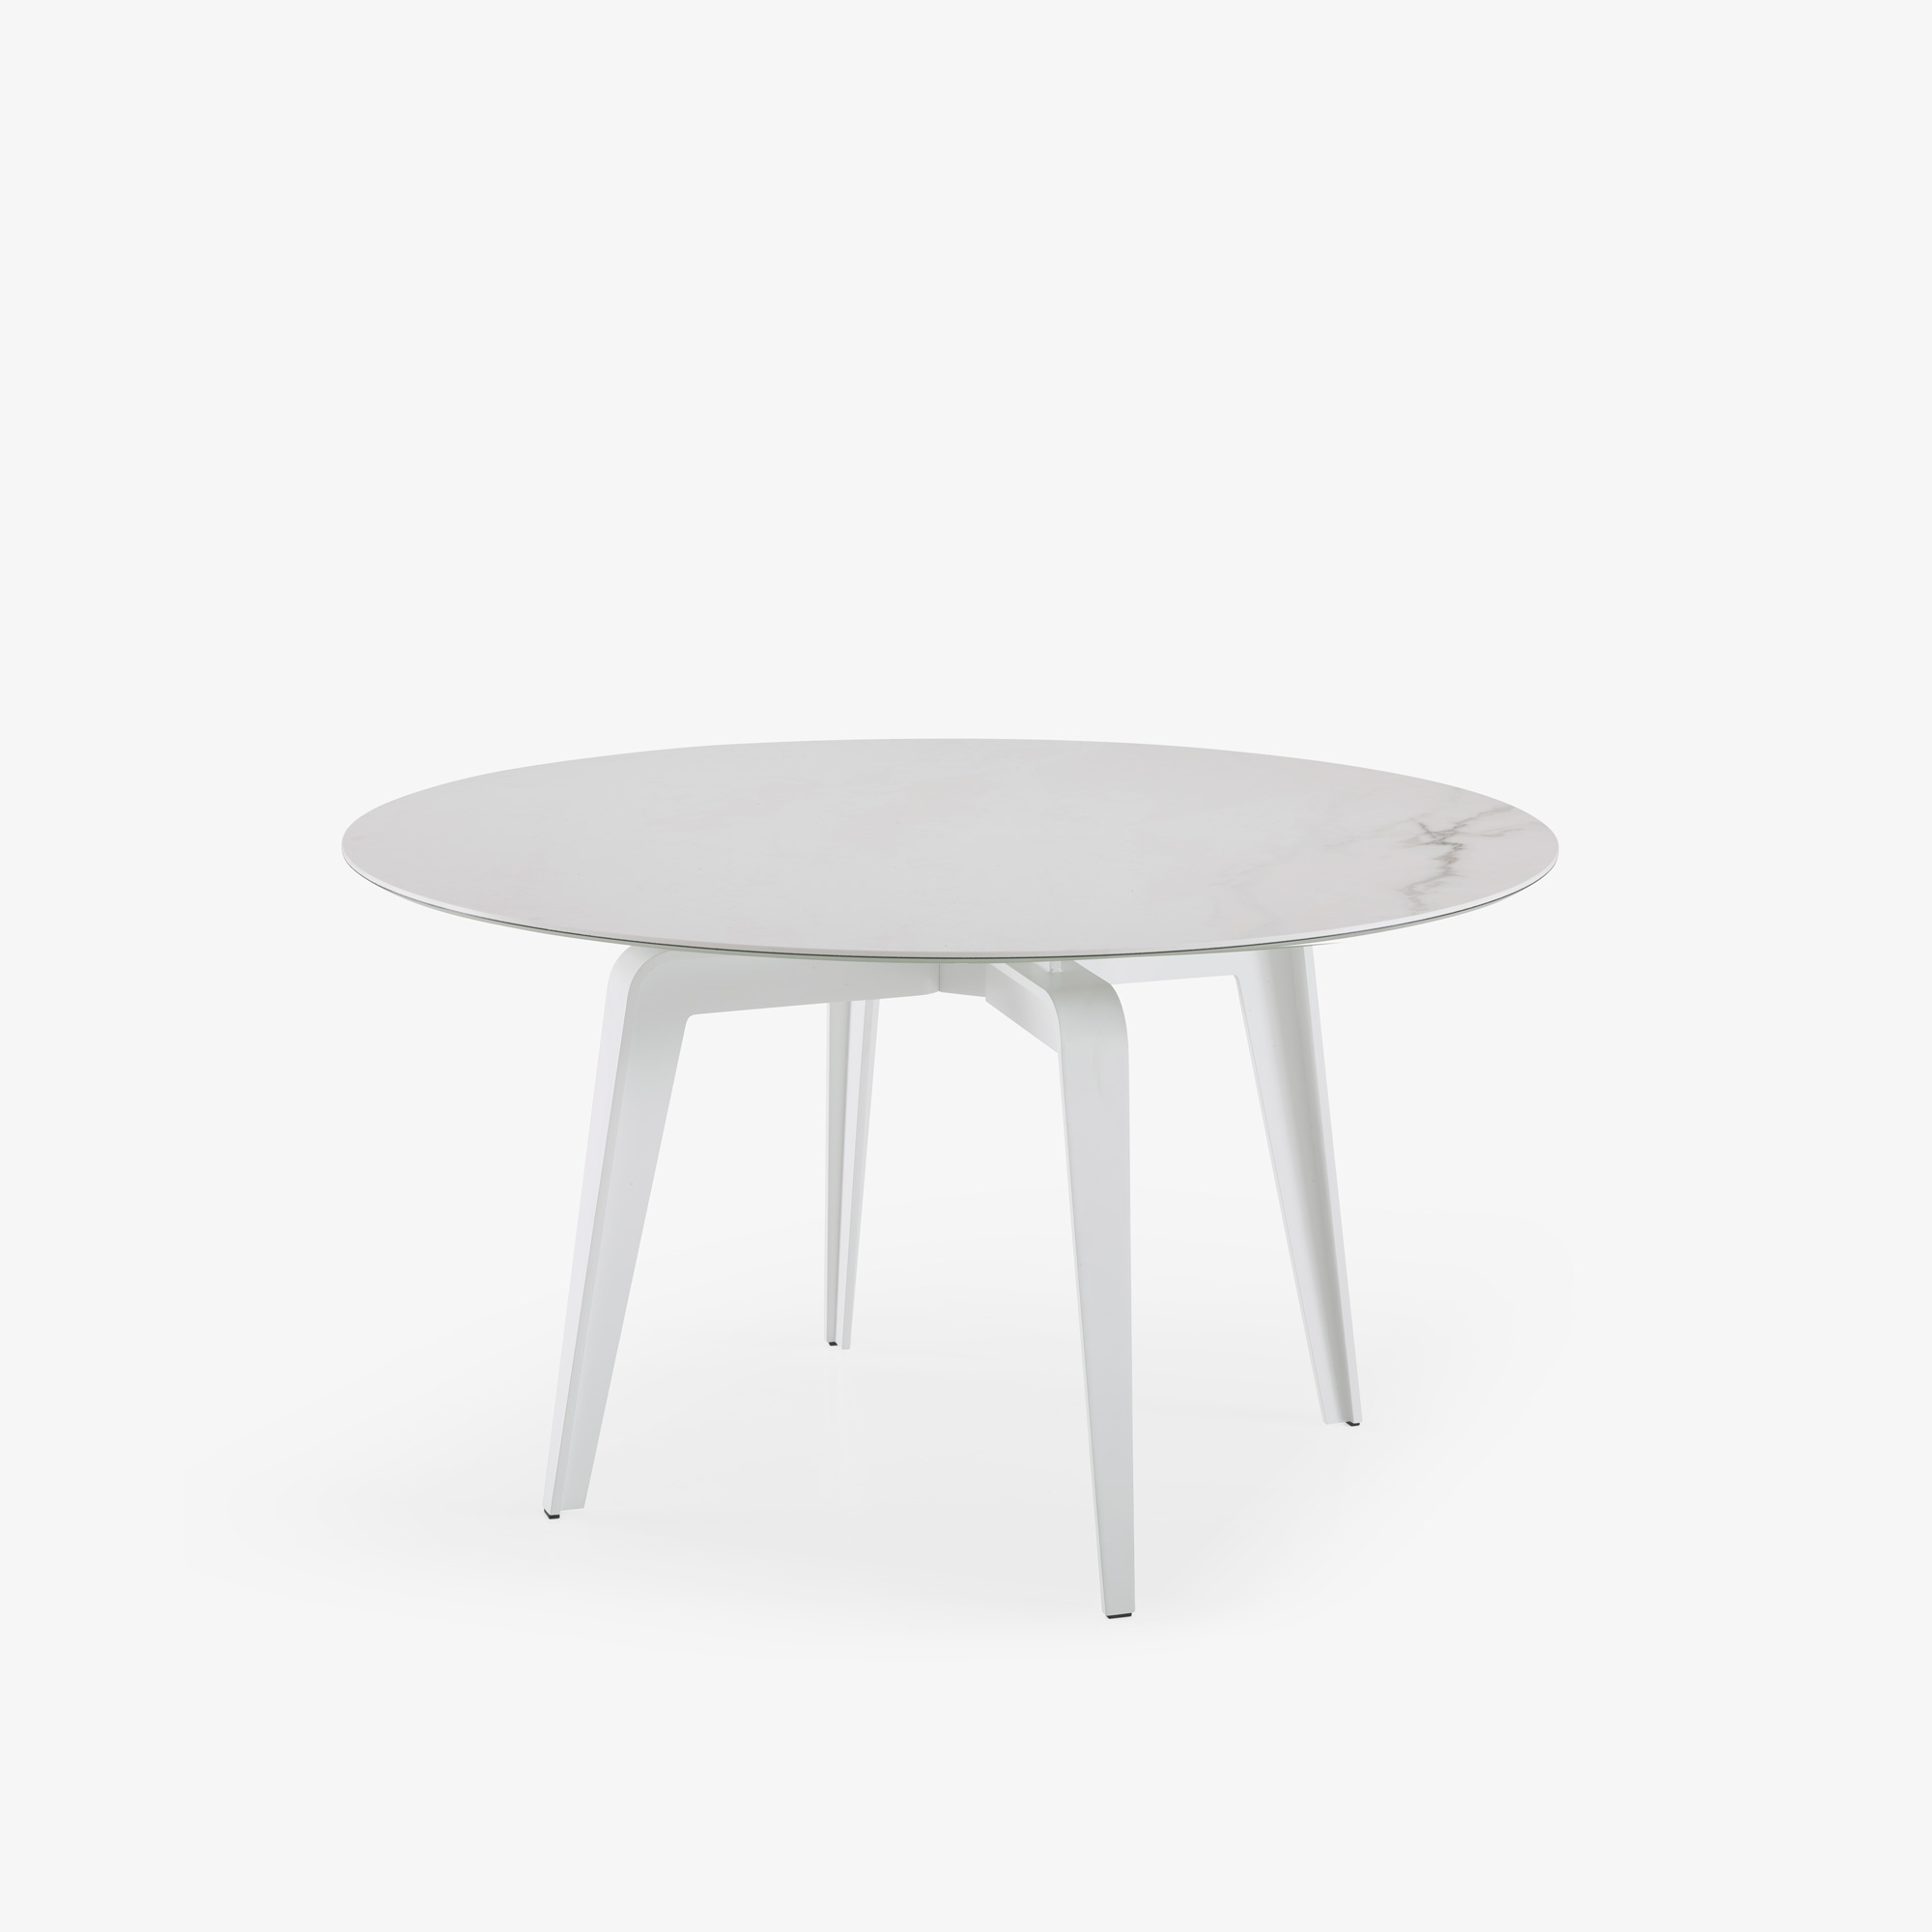 Image Round dining table white lacquered base  2